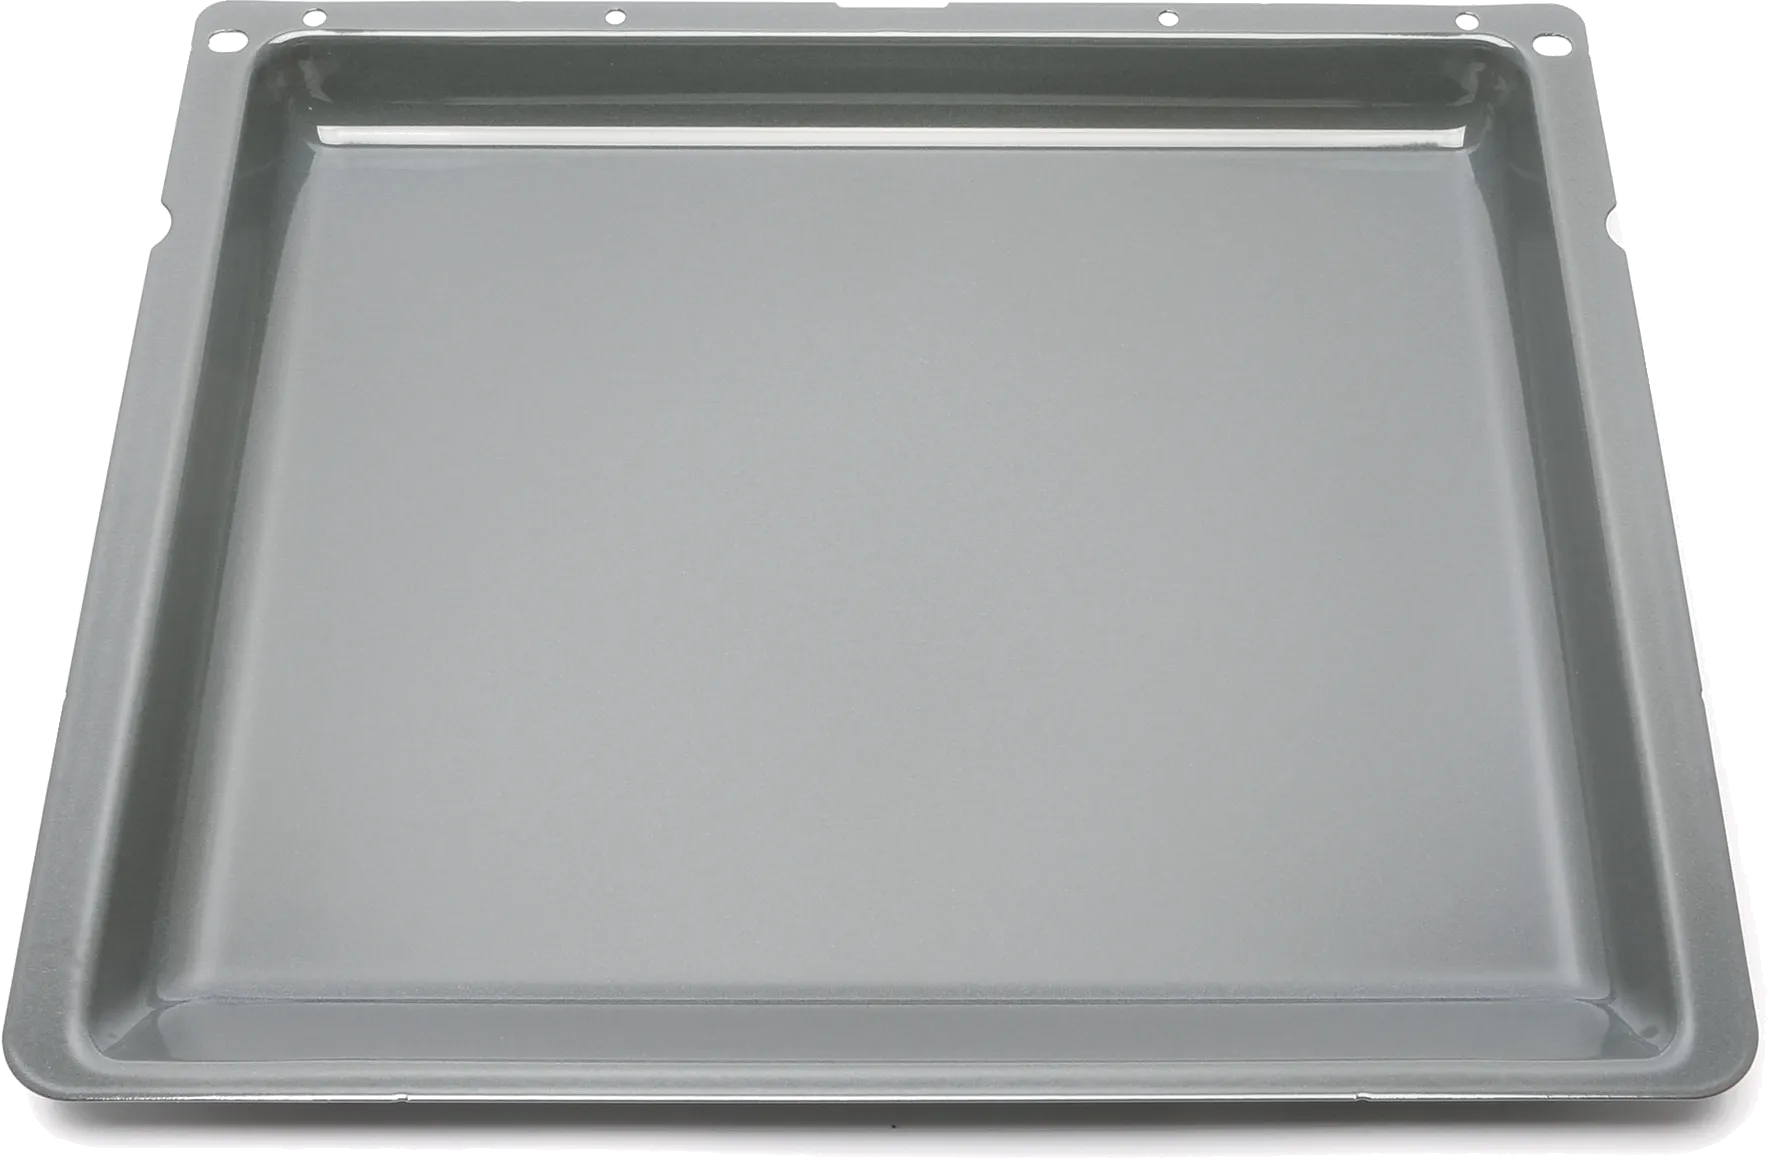 Baking tray for ovens 